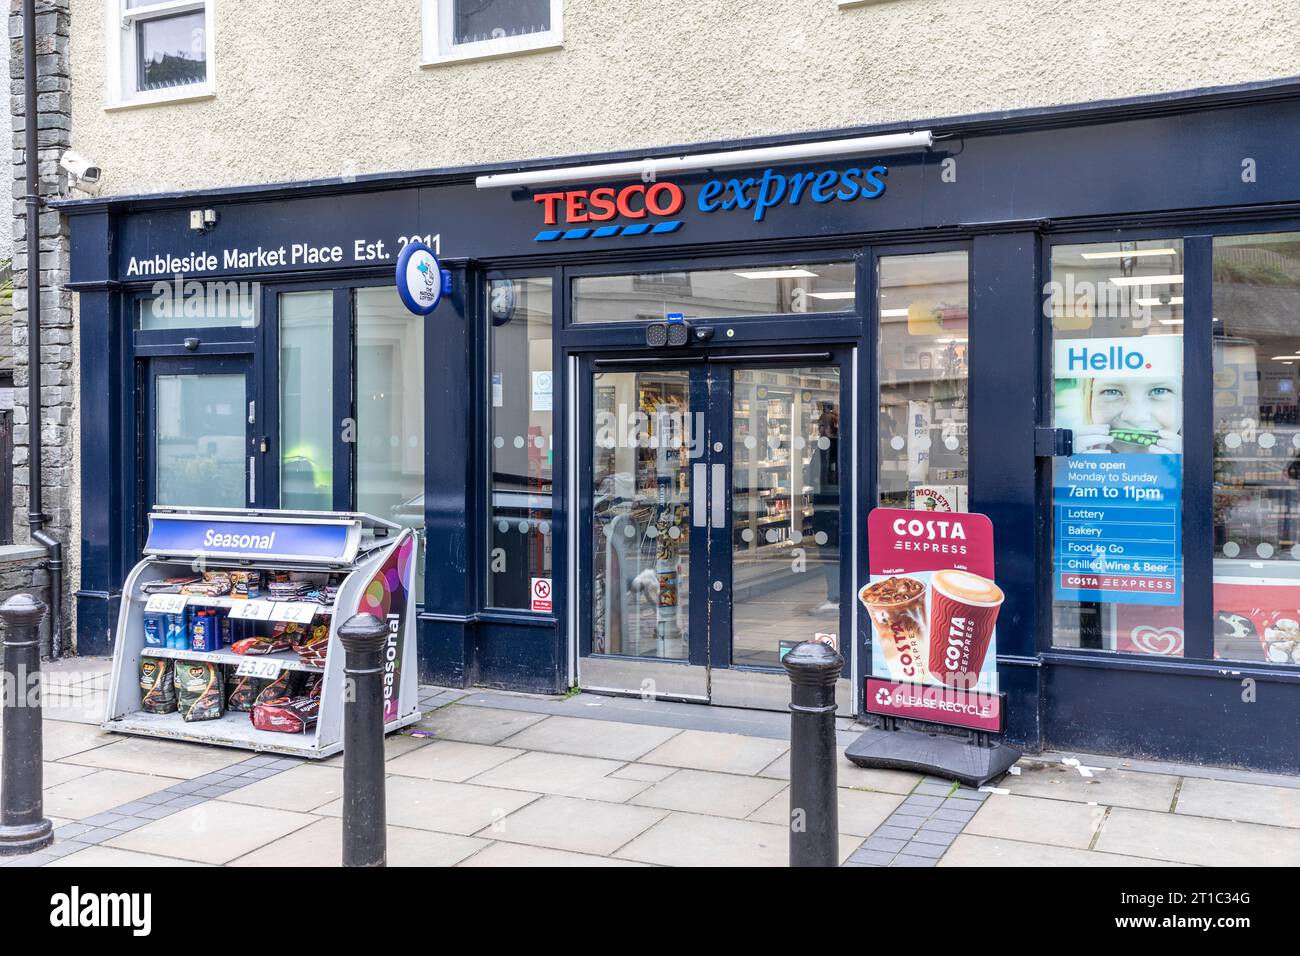 Tesco express supermarket grocery store in Ambleside town centre,Lake District,Cumbria,England,UK Stock Photo